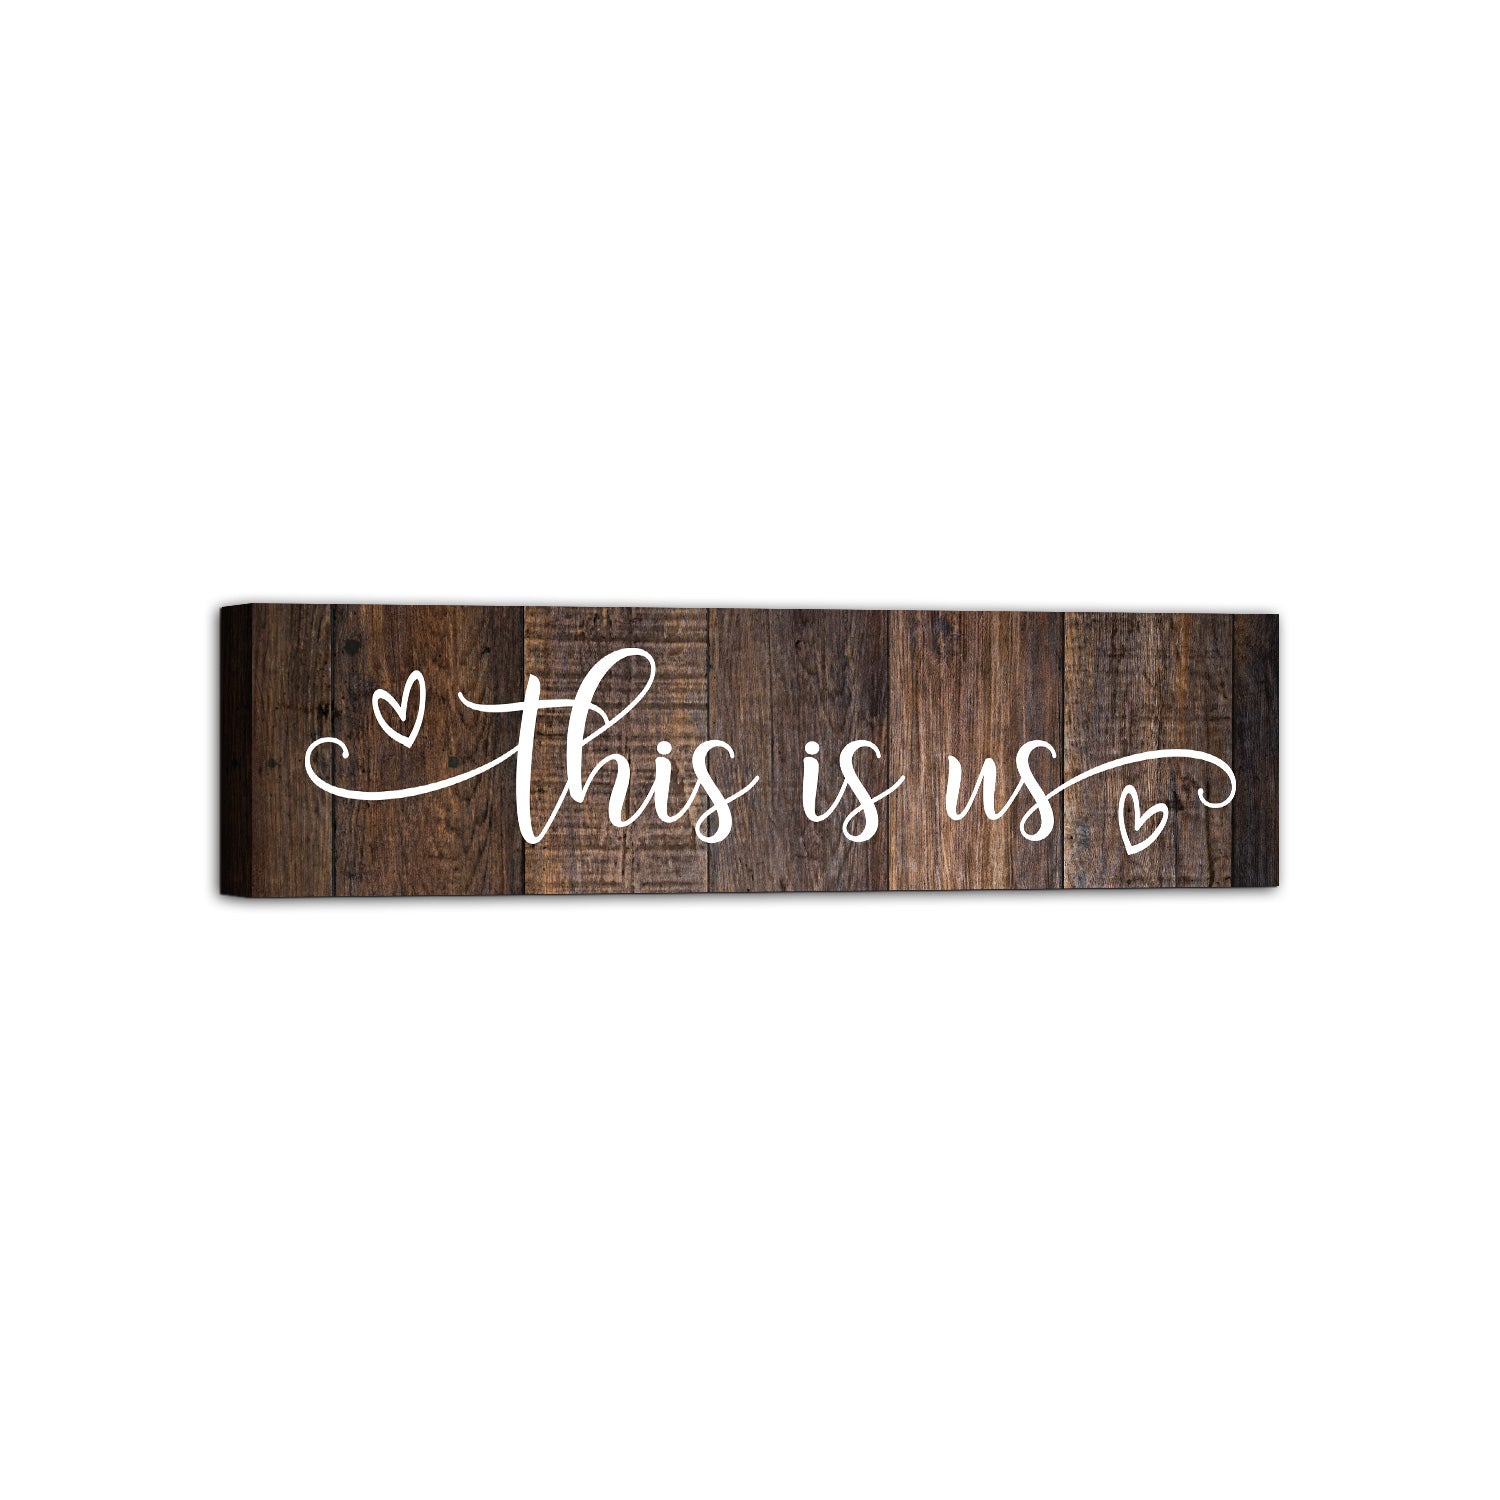 This Is Us Canvas Wall Art Framed Modern Wall Decor Decorative Accents For Walls Ready to Hang for Home Living Room Bedroom Entryway Kitchen Office Size 24”x16”